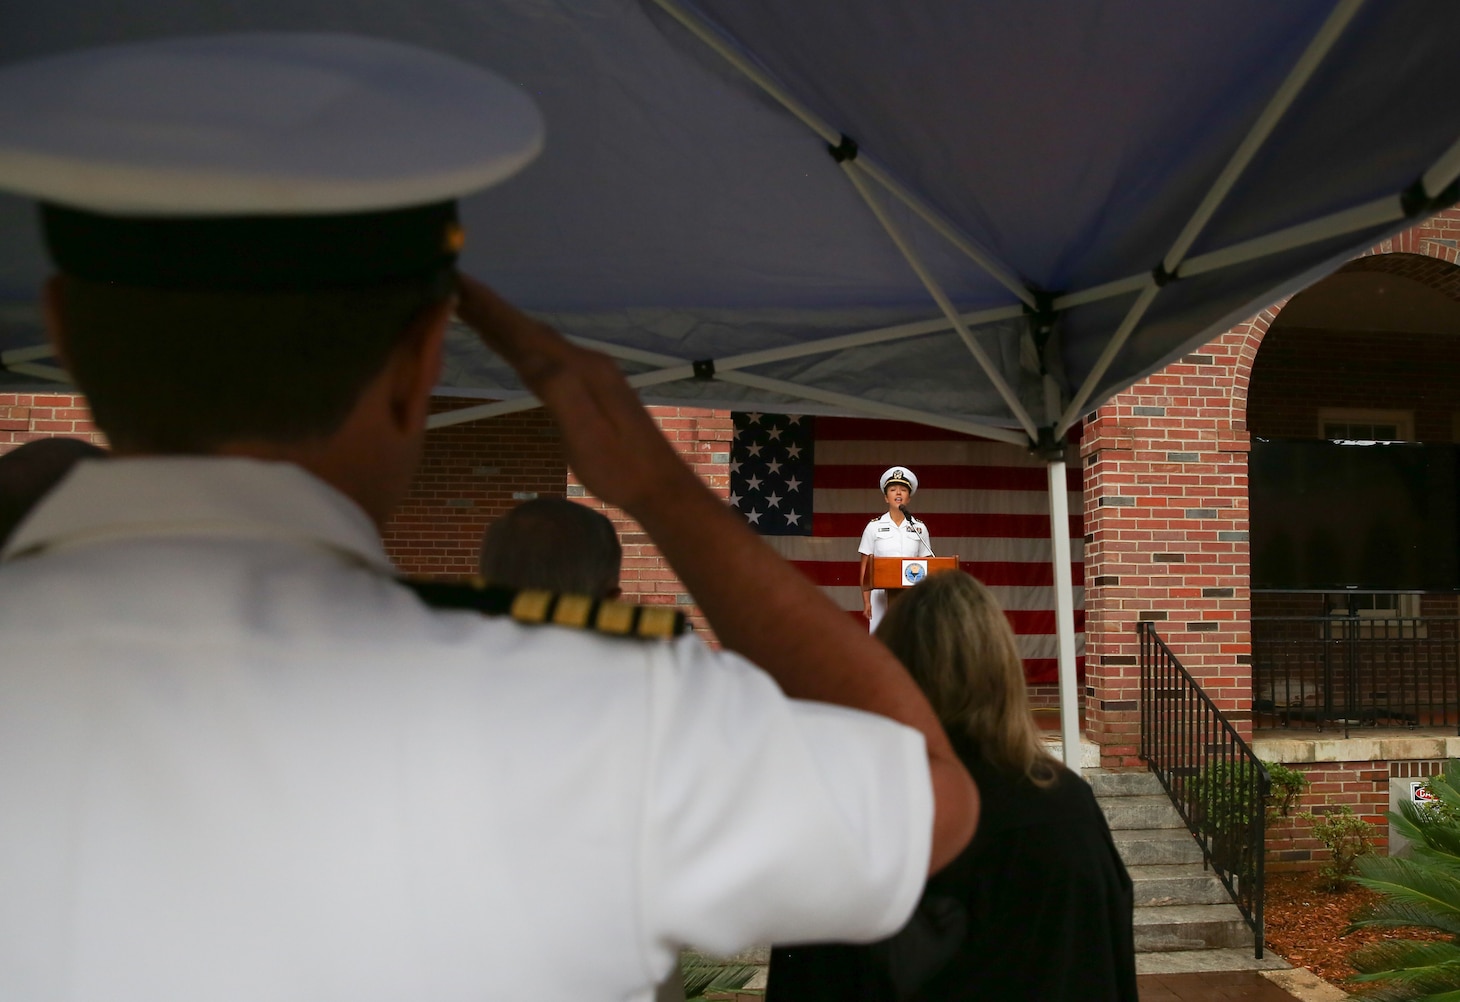 Lt. Cmdr. Kimi Schultheiss sings the national anthem during the Naval Education and Training Command (NETC) 50th anniversary ceremony at Naval Air Station Pensacola.  NETC, led by Rear Adm. Pete Garvin, is the U.S. Navy’s Force Development pillar and largest shore command.  Through its “Street to Fleet” focus, NETC recruits civilians and transforms them into skilled warfighters ready to meet the current and future needs of the U.S. Navy.